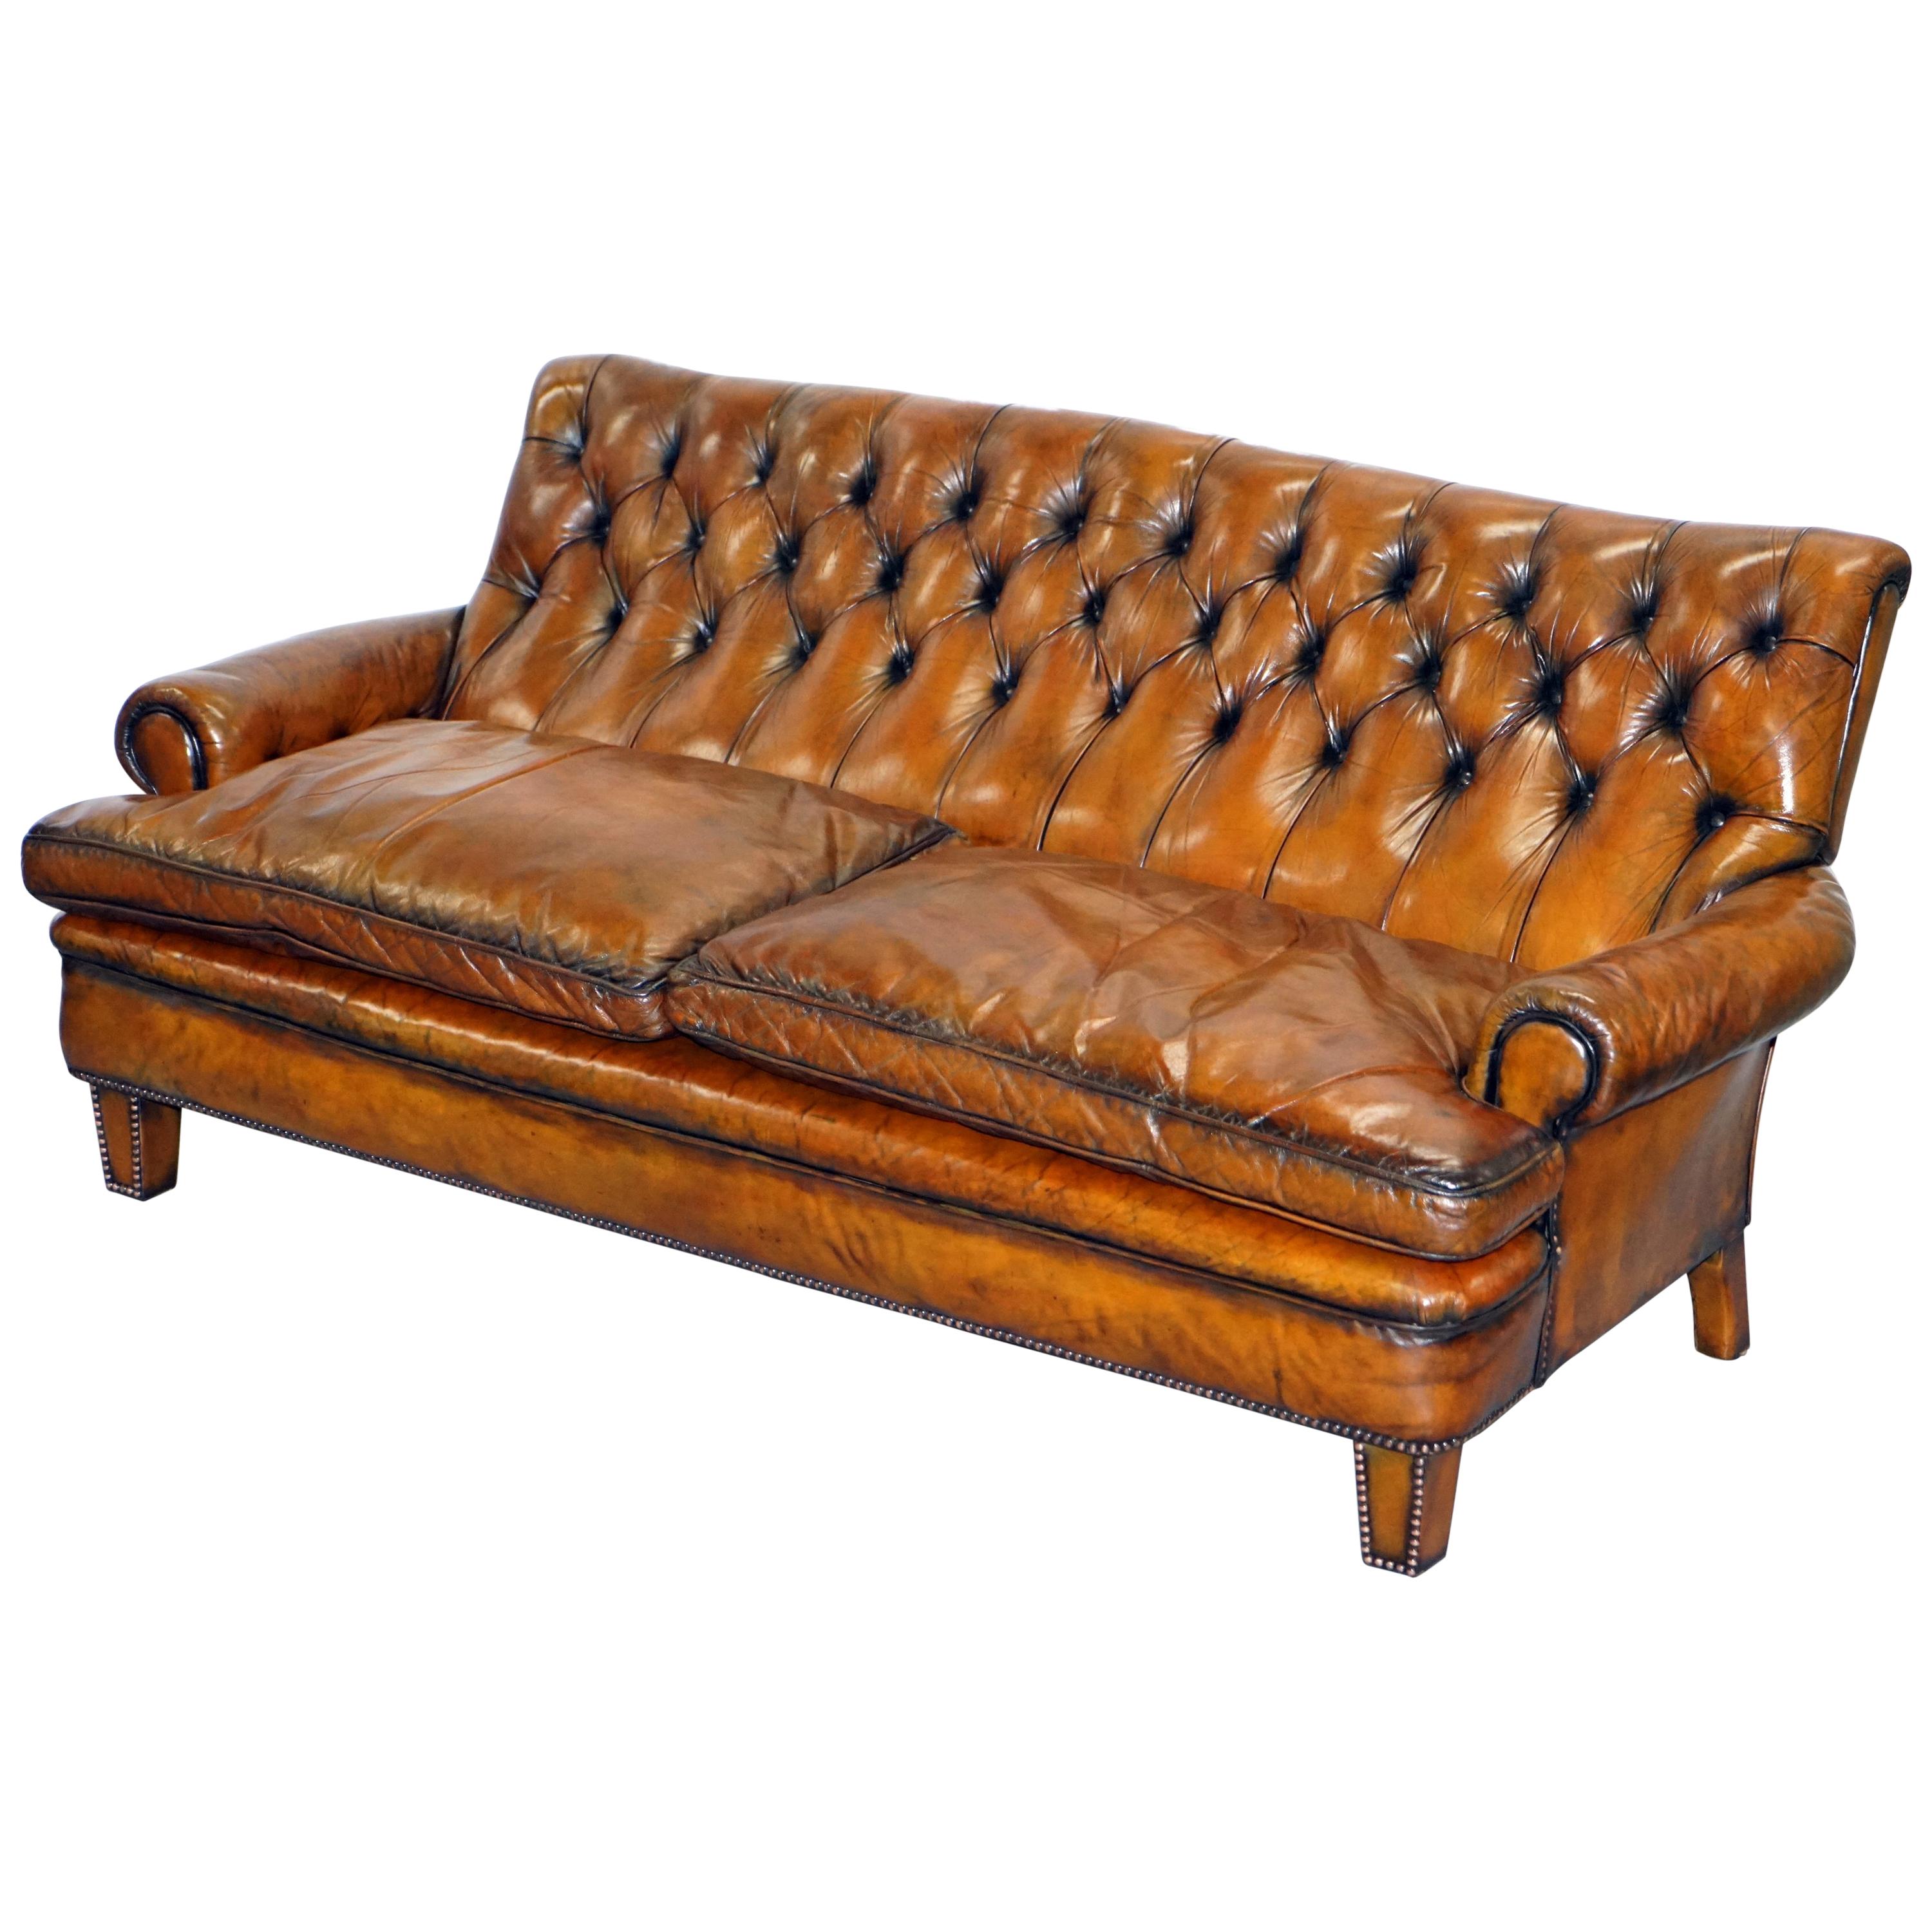 Very Comfortable Victorian Restored Howard & Son's Style Aged Brown Leather Sofa